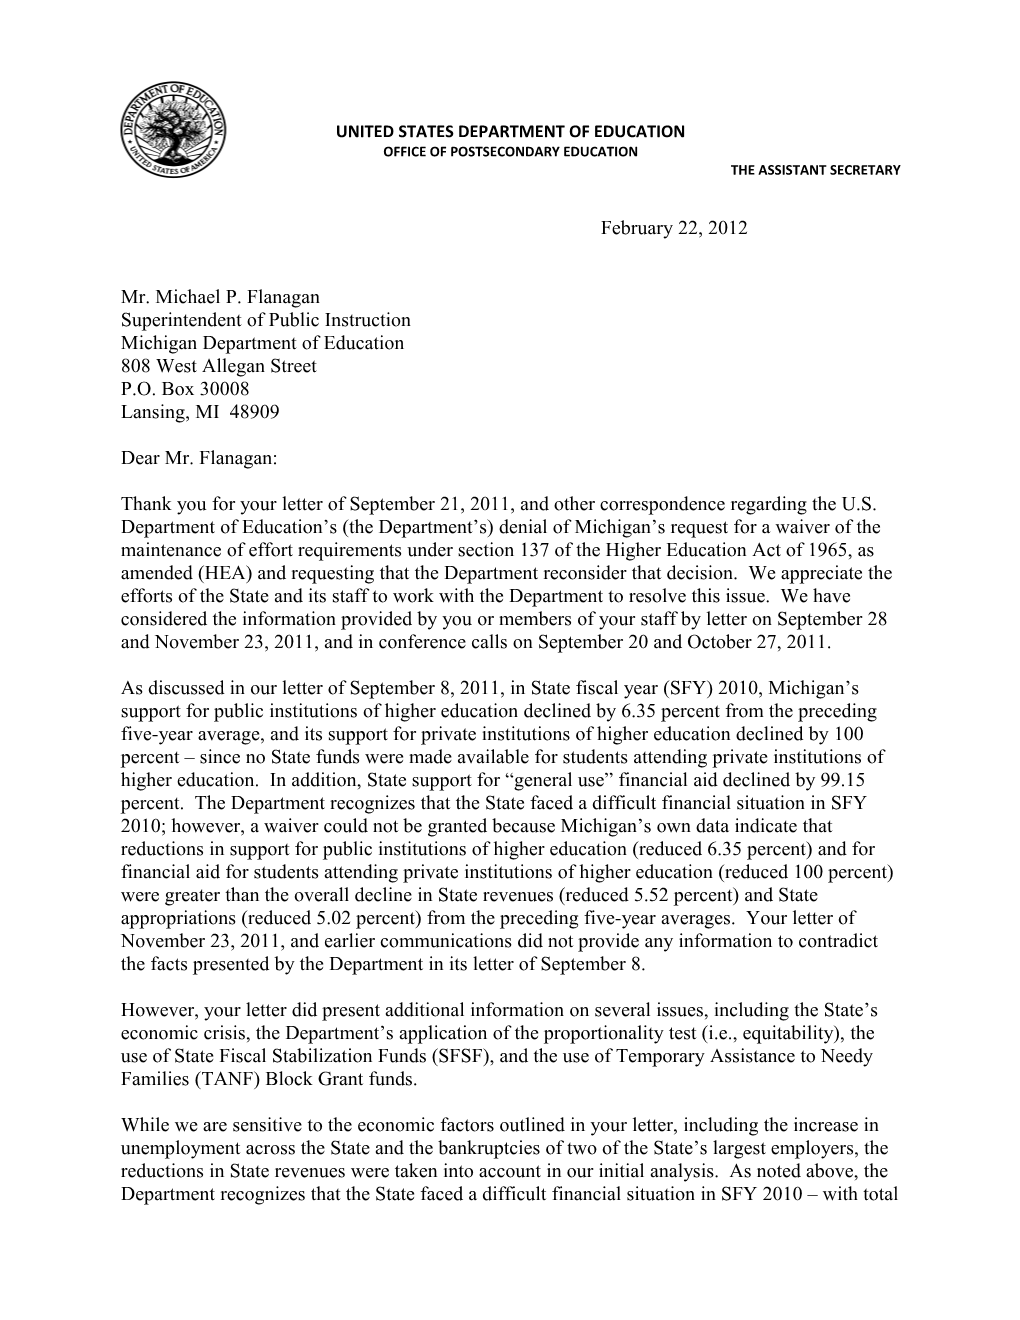 Waiver of the Maintenance of Effort - Michigan 2011 Followup Letter: College Access Challenge